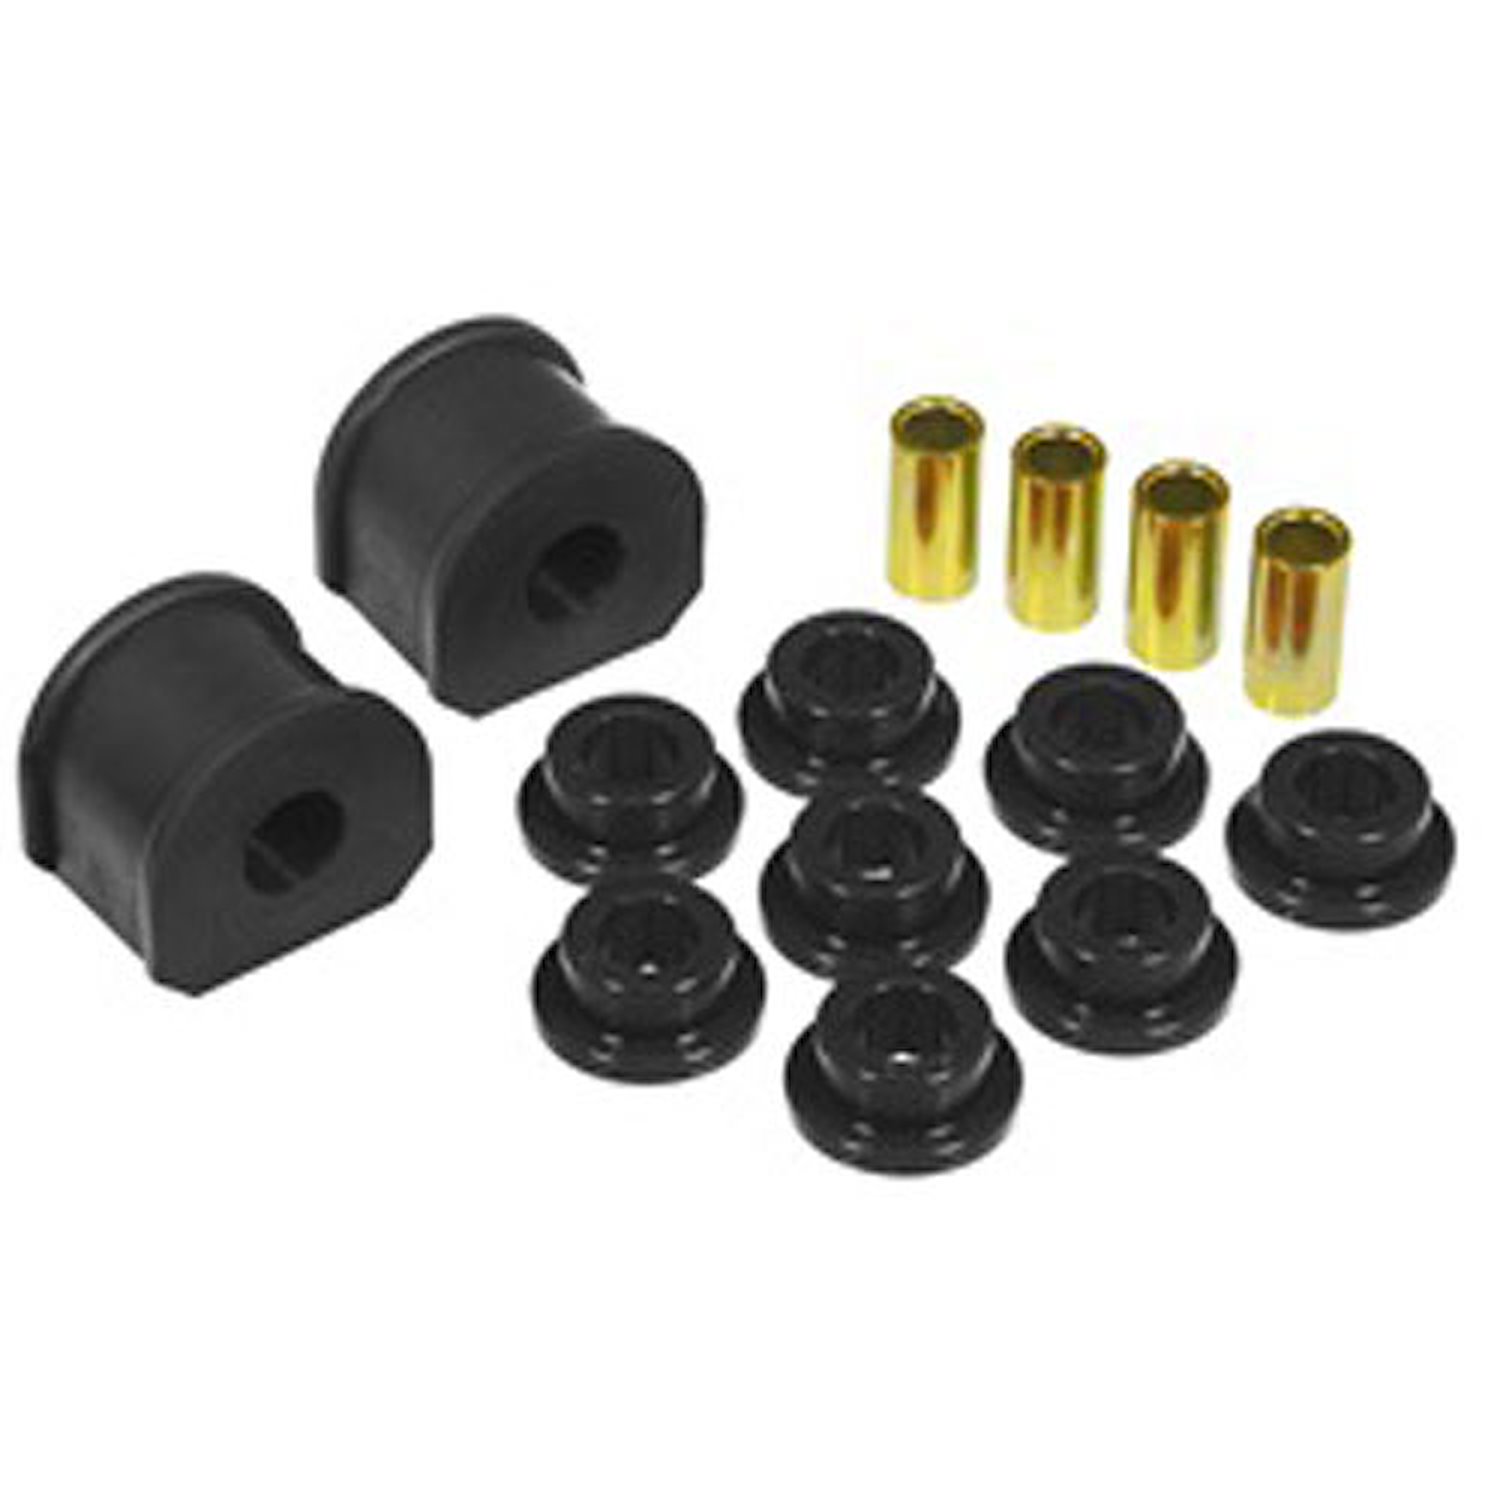 BUSHING EXPED RR S/B BSH 2WD 21MM 97-02